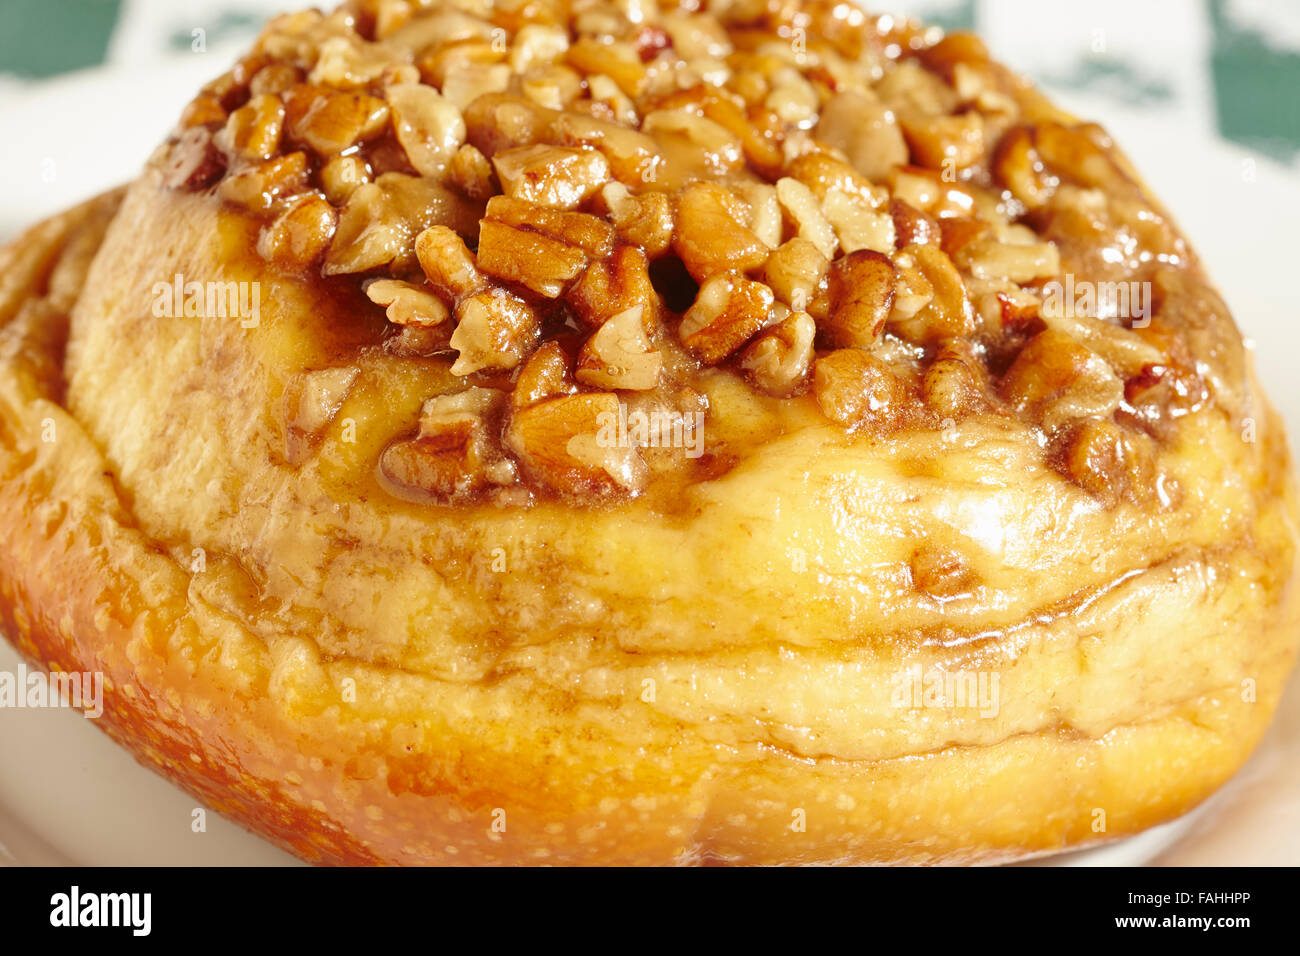 Sticky bun with nut topping Stock Photo